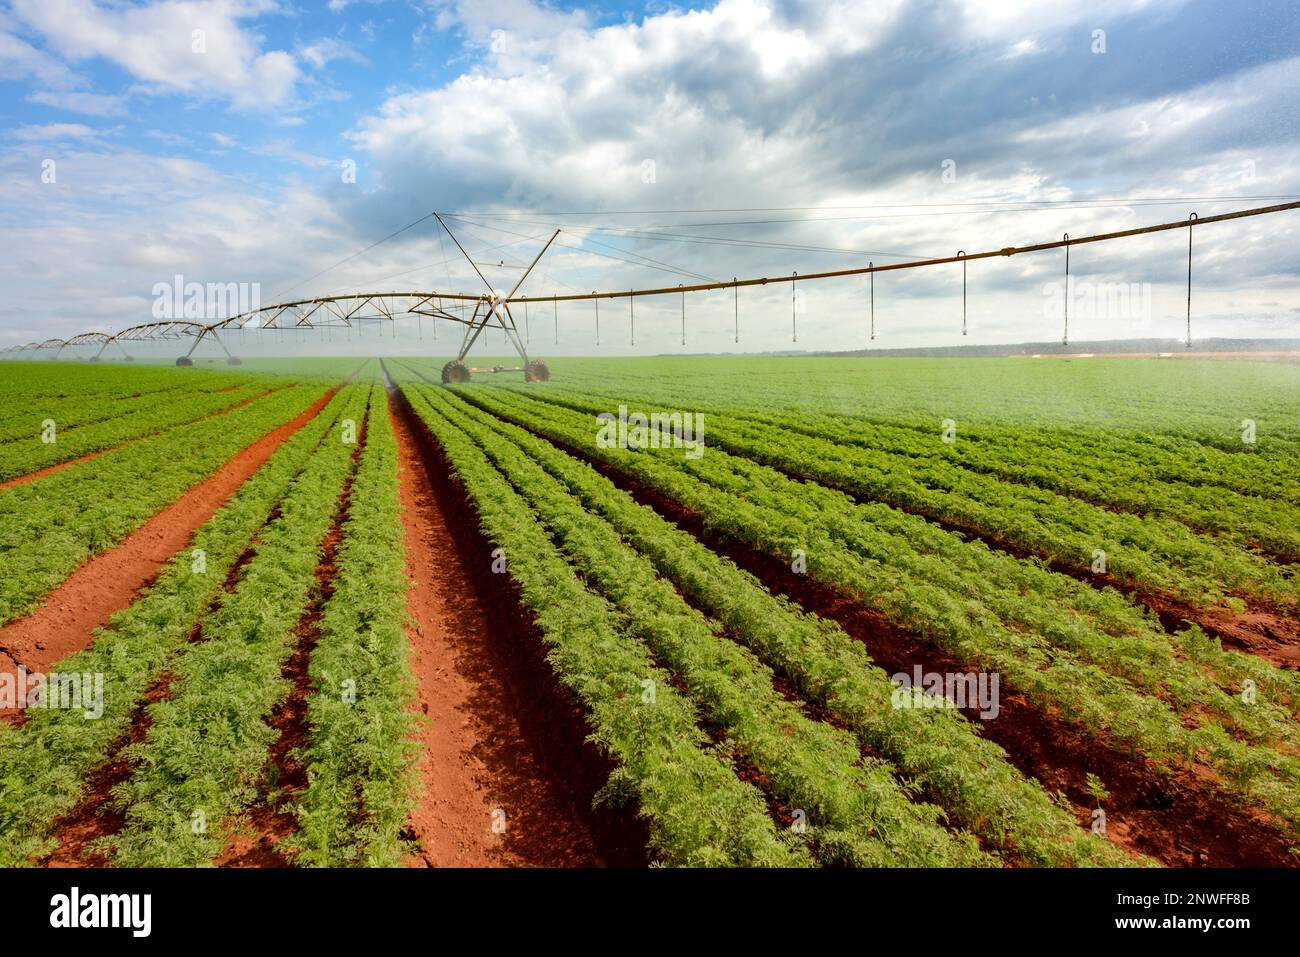 agriculture, carrot plantation with pivot irrigation system in the background Stock Photo